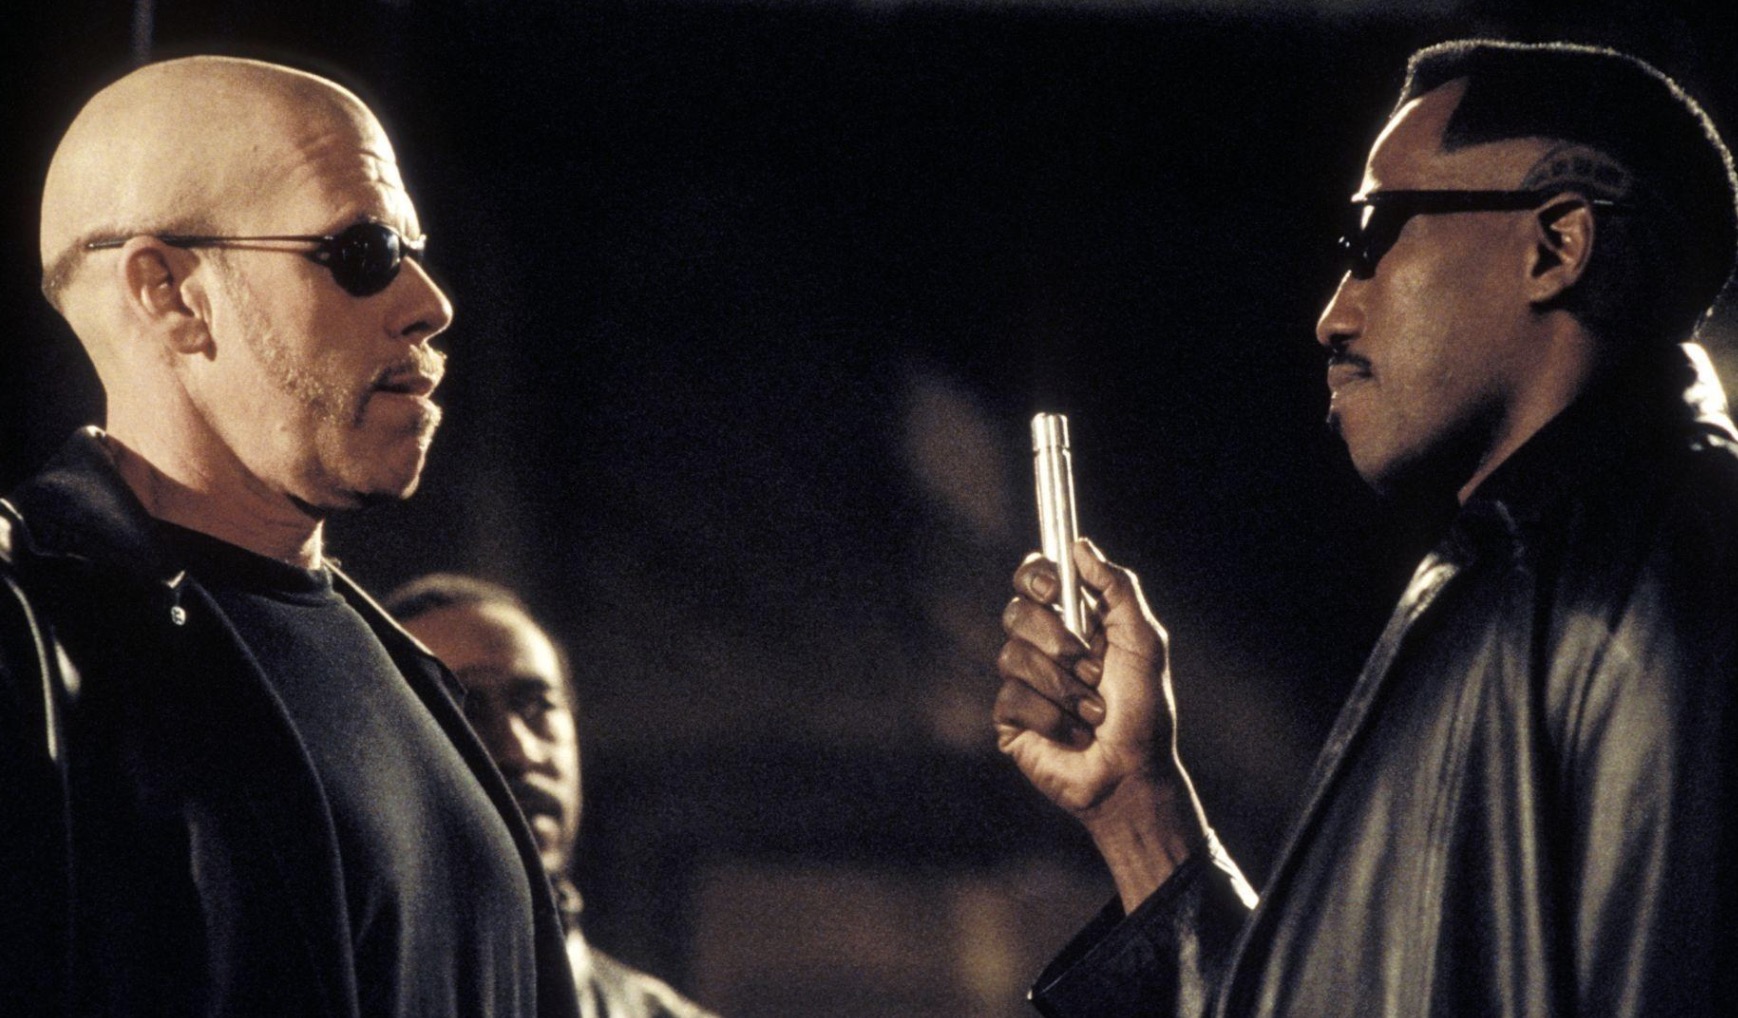 Blade II Is An Important Guillermo Del Toro Movie That Does Not Hold Up At All